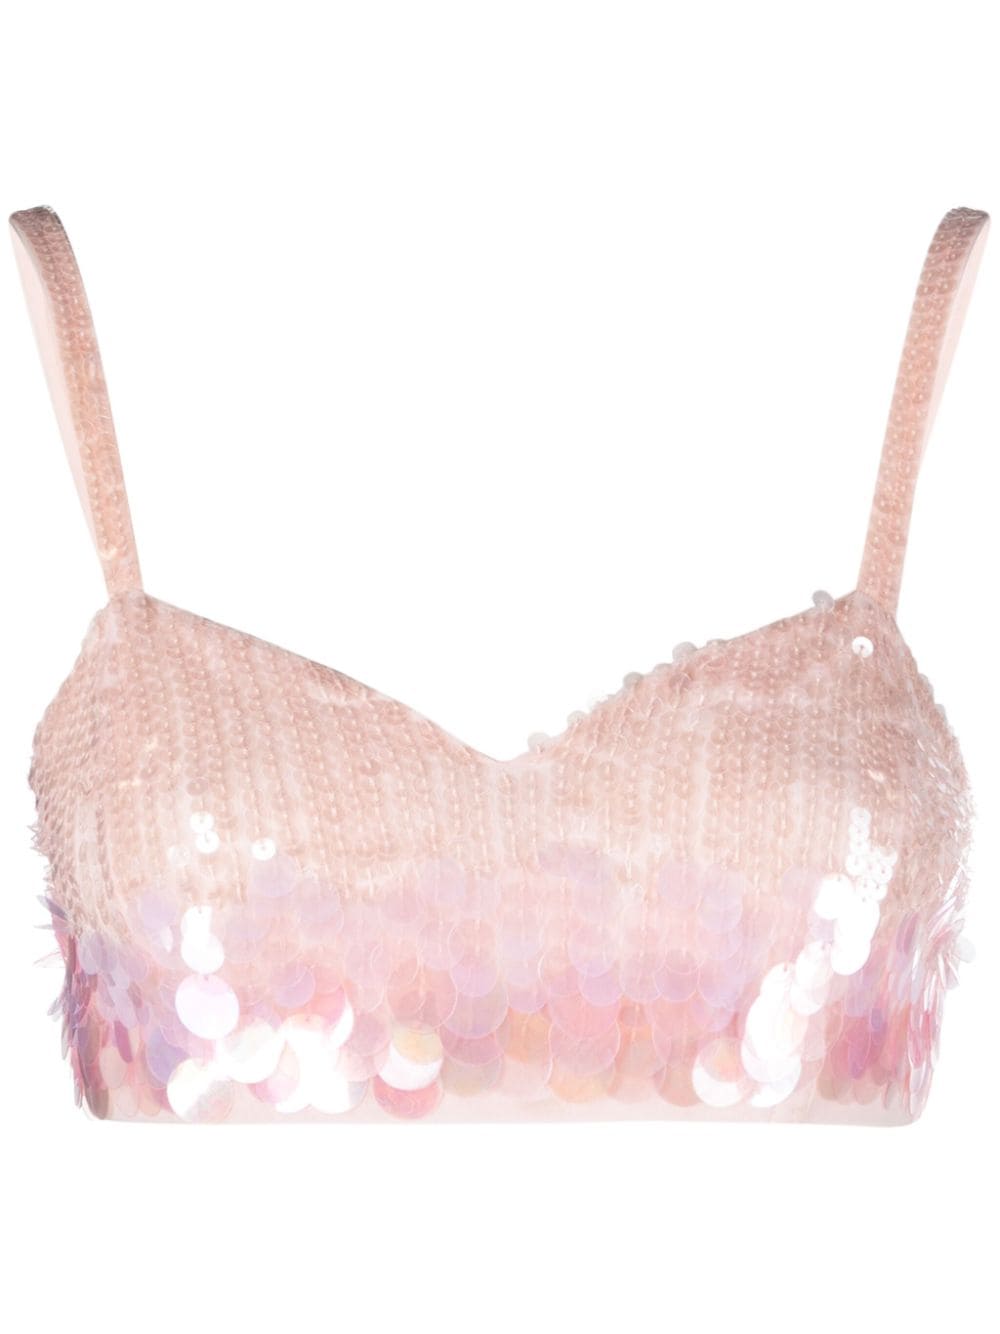 P.A.R.O.S.H. iridescent sequin cropped top - Pink von P.A.R.O.S.H.